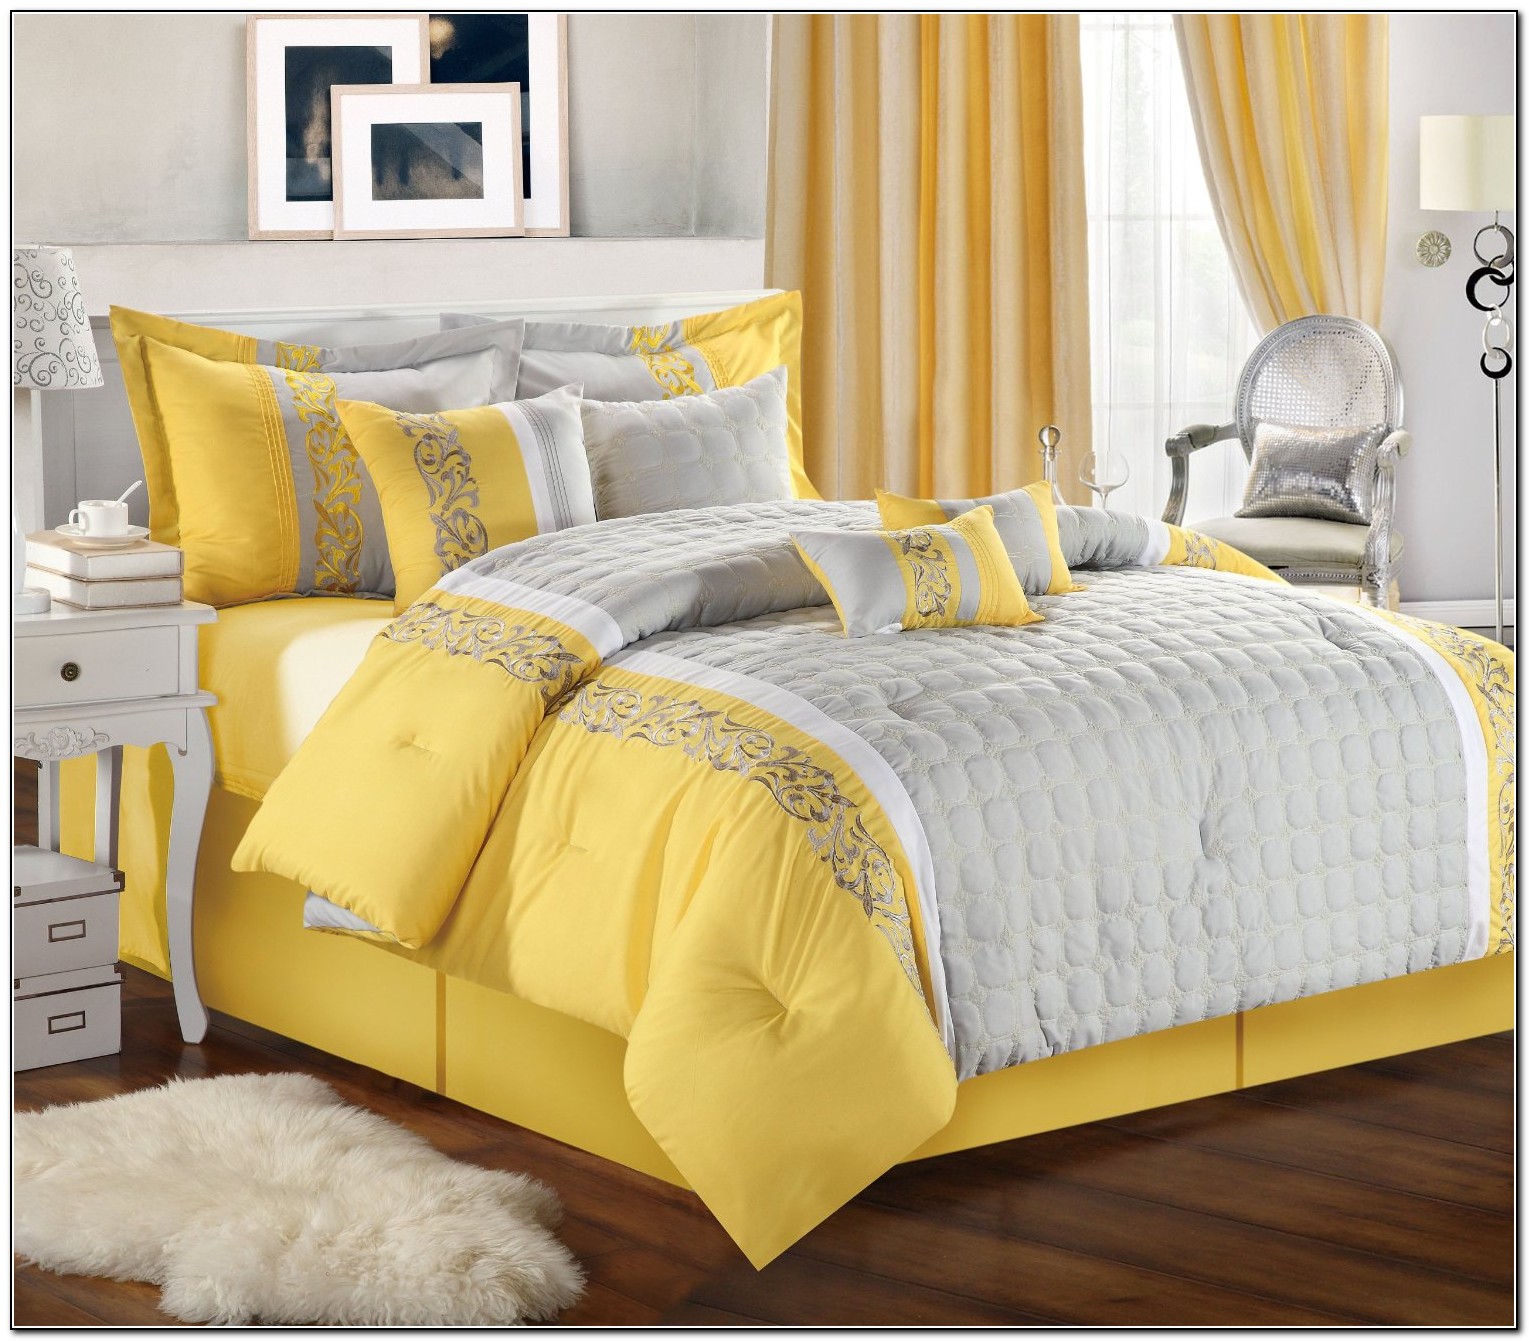  Grey  And Yellow  Bedding Sets Beds Home Design Ideas 